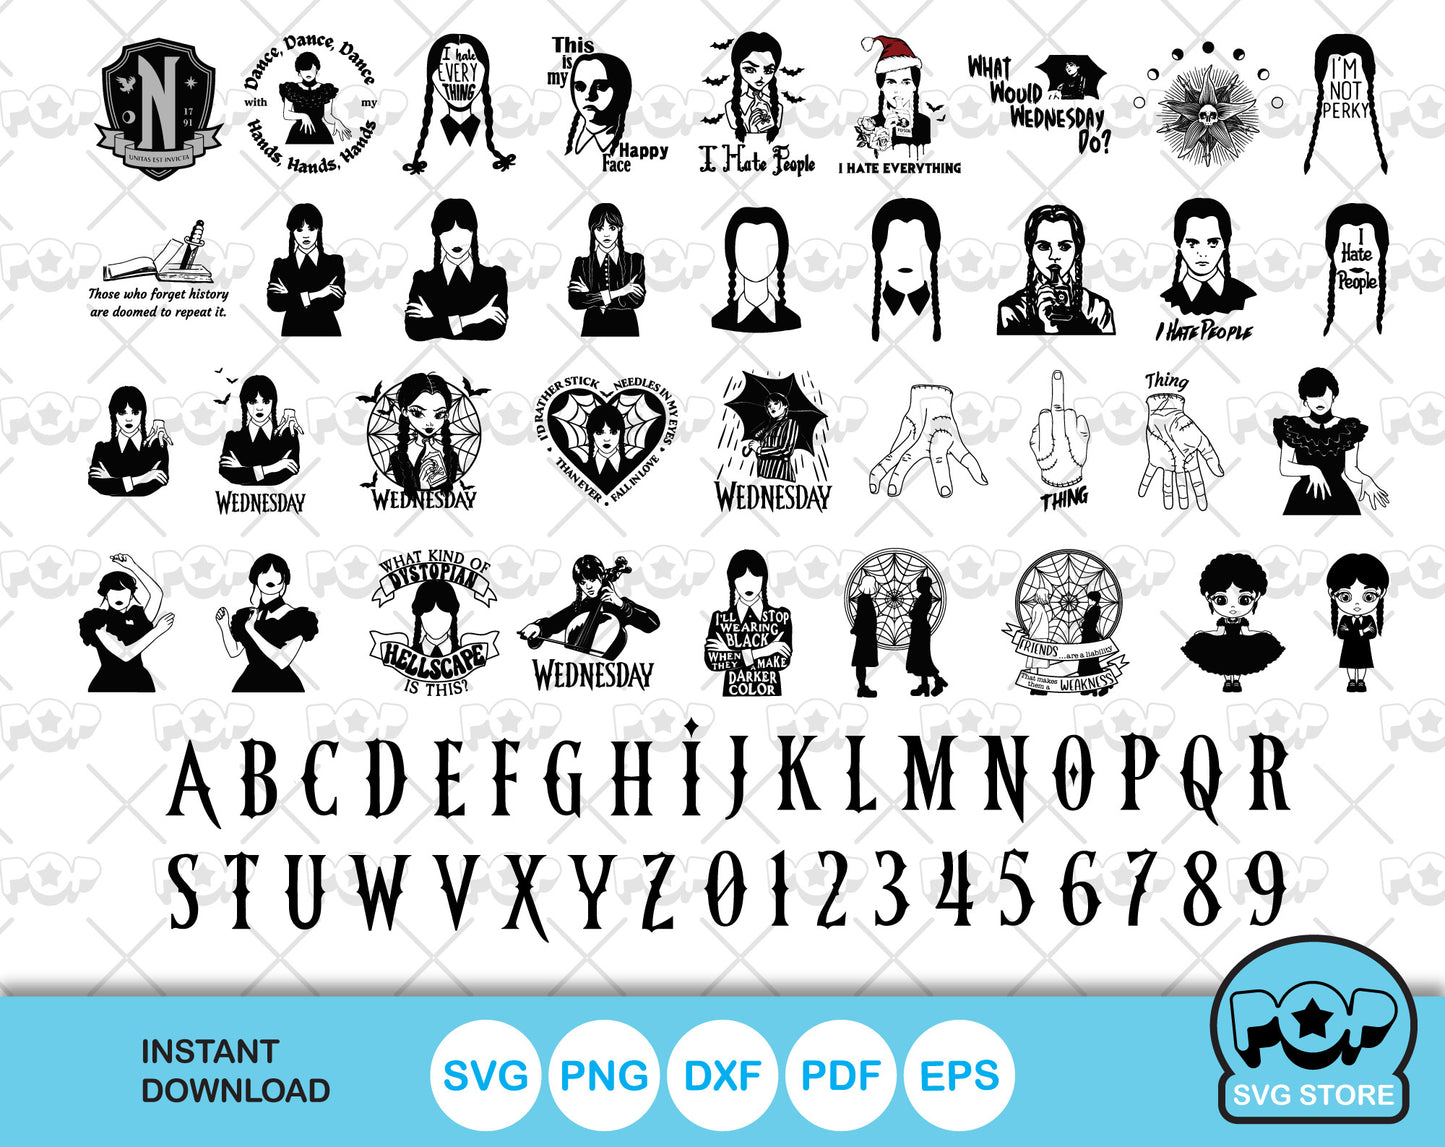 Wednesday Addams 100 cliparts set + alphabet, Wednesday svg cut files for Cricut / Silhouette, Wednesday png, dxf